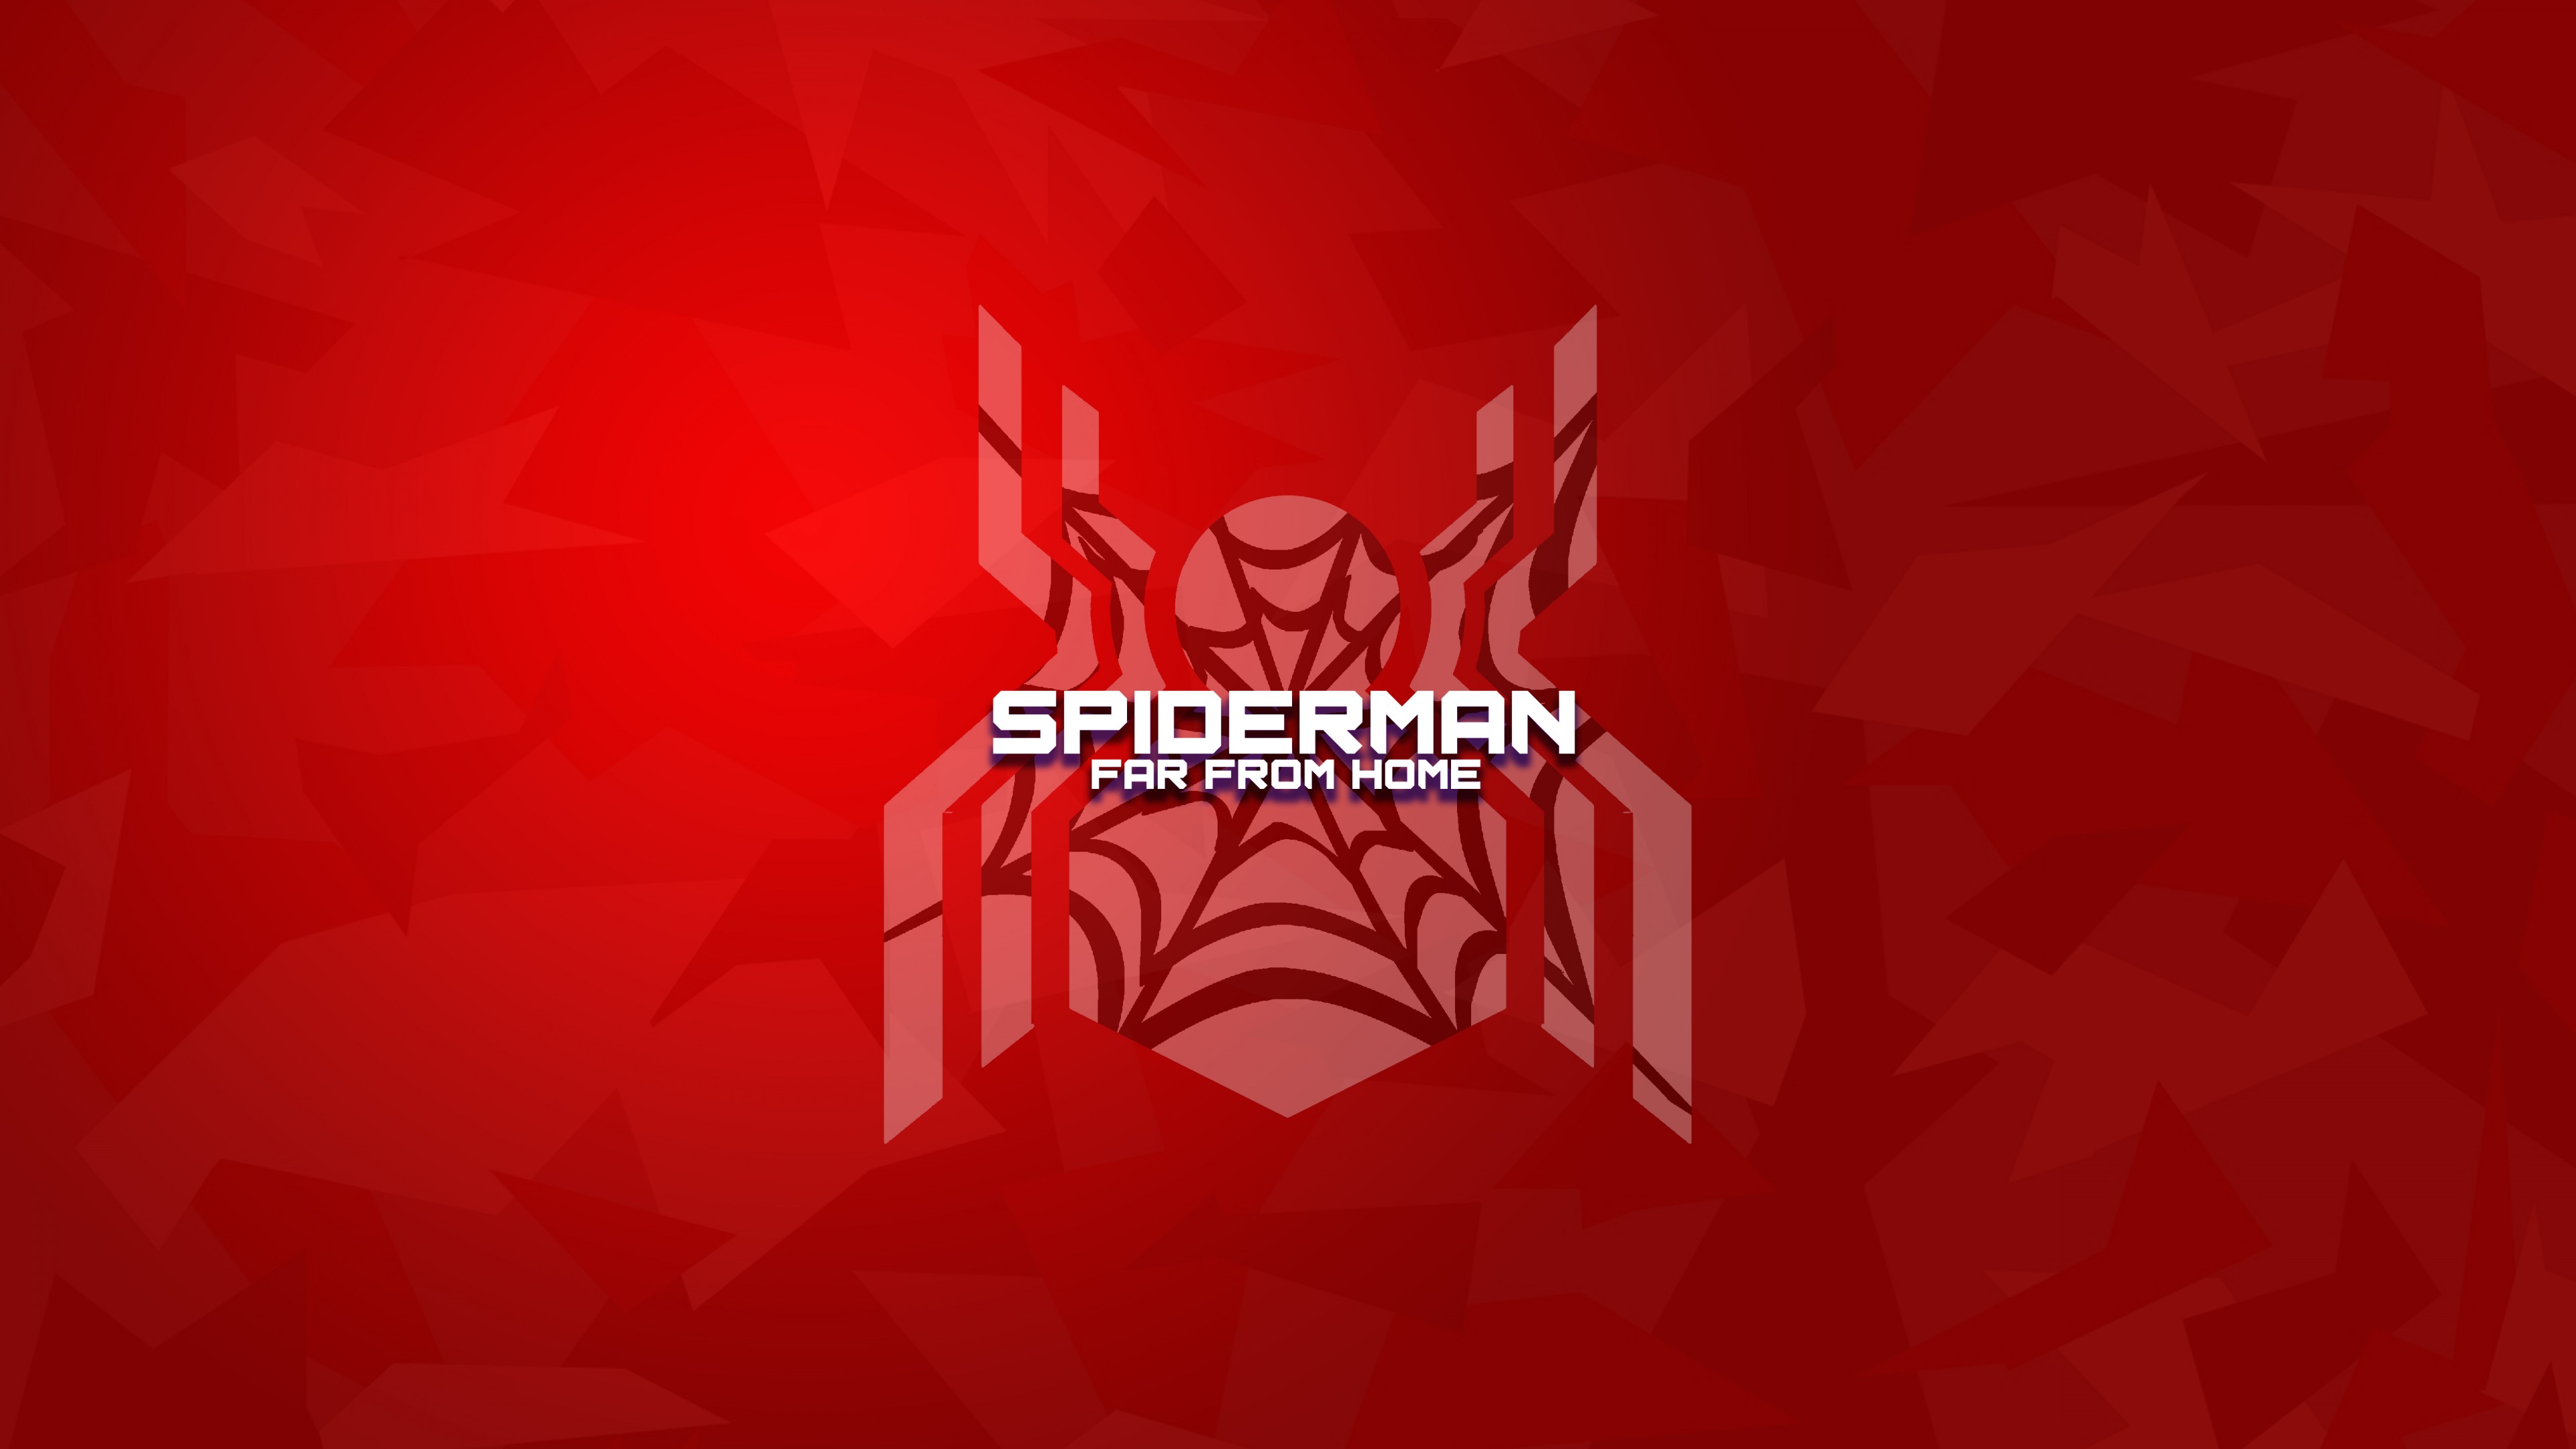 Spider-Man Far From Home 5K